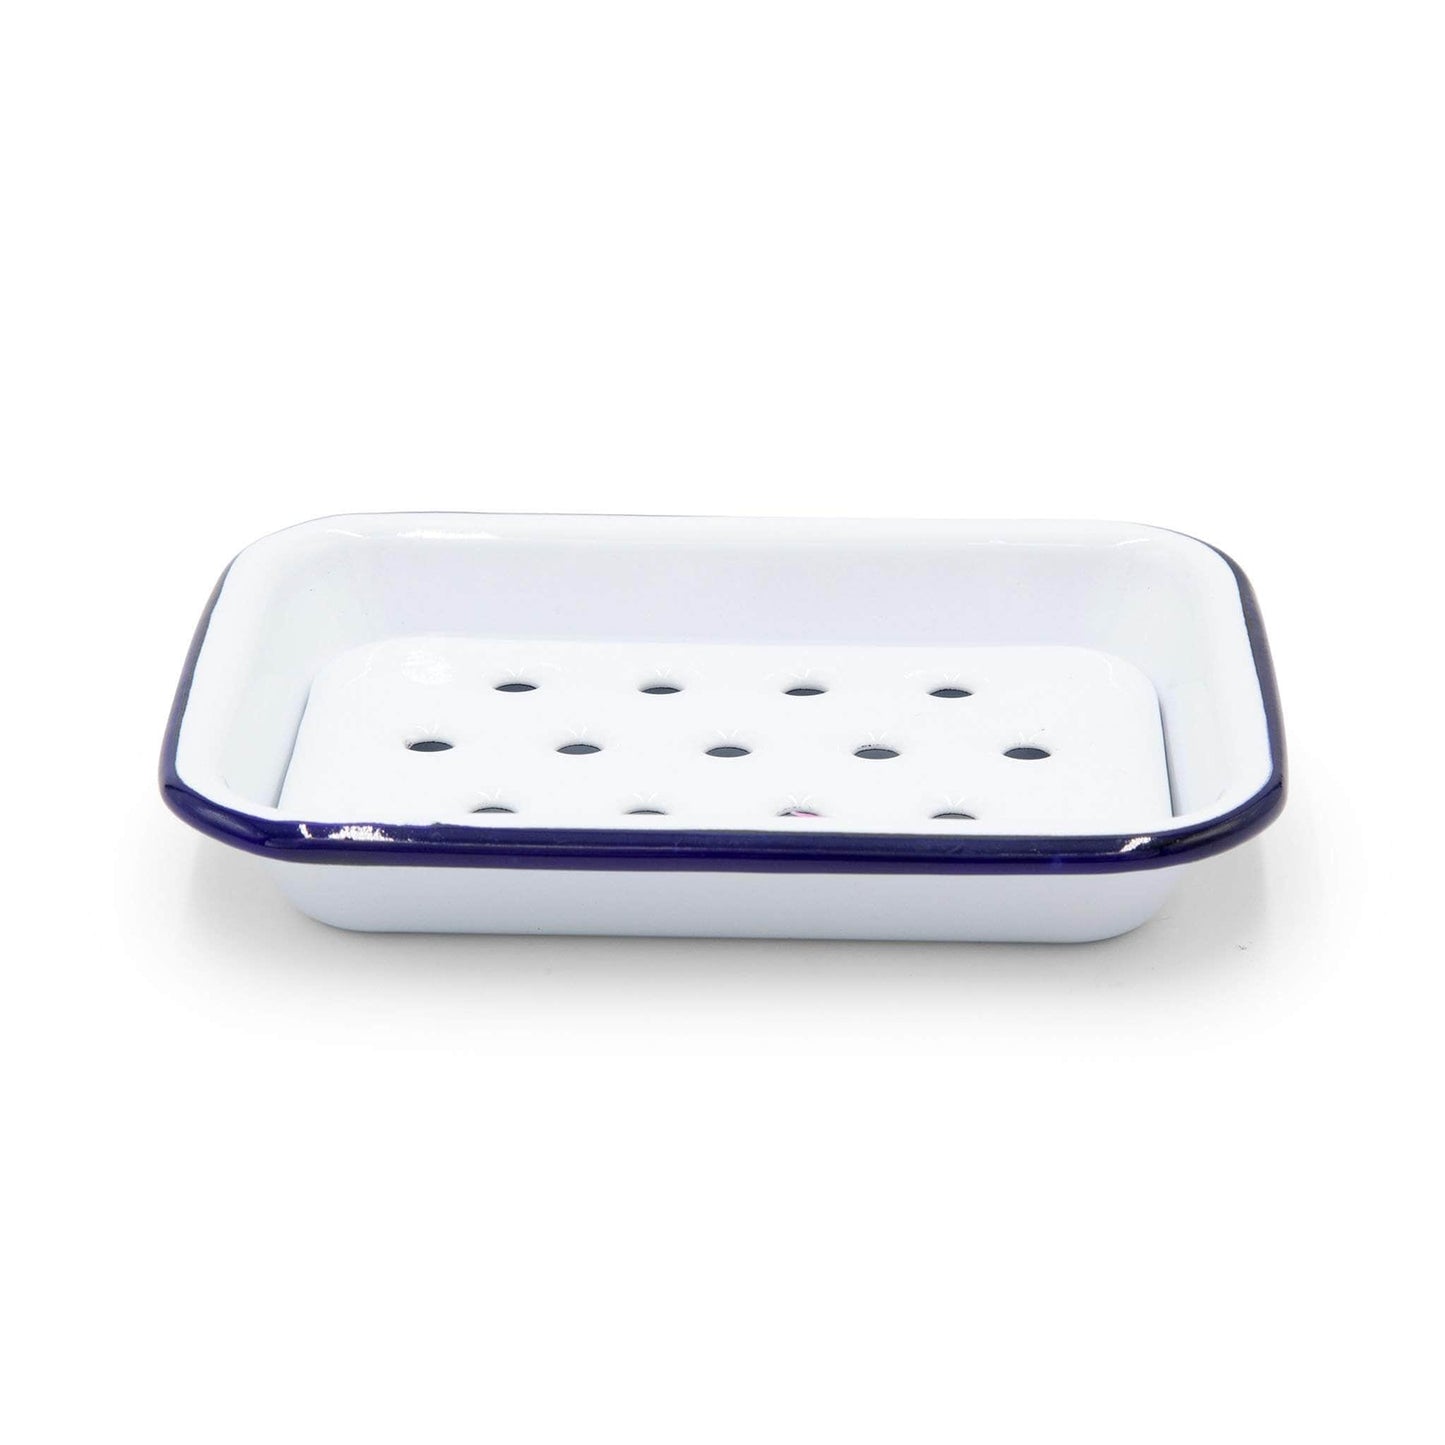 Falcon Homewares Soap Dishes Falcon Housewares Blue and White Enamel Soap Dish with Removable Drainage Tray